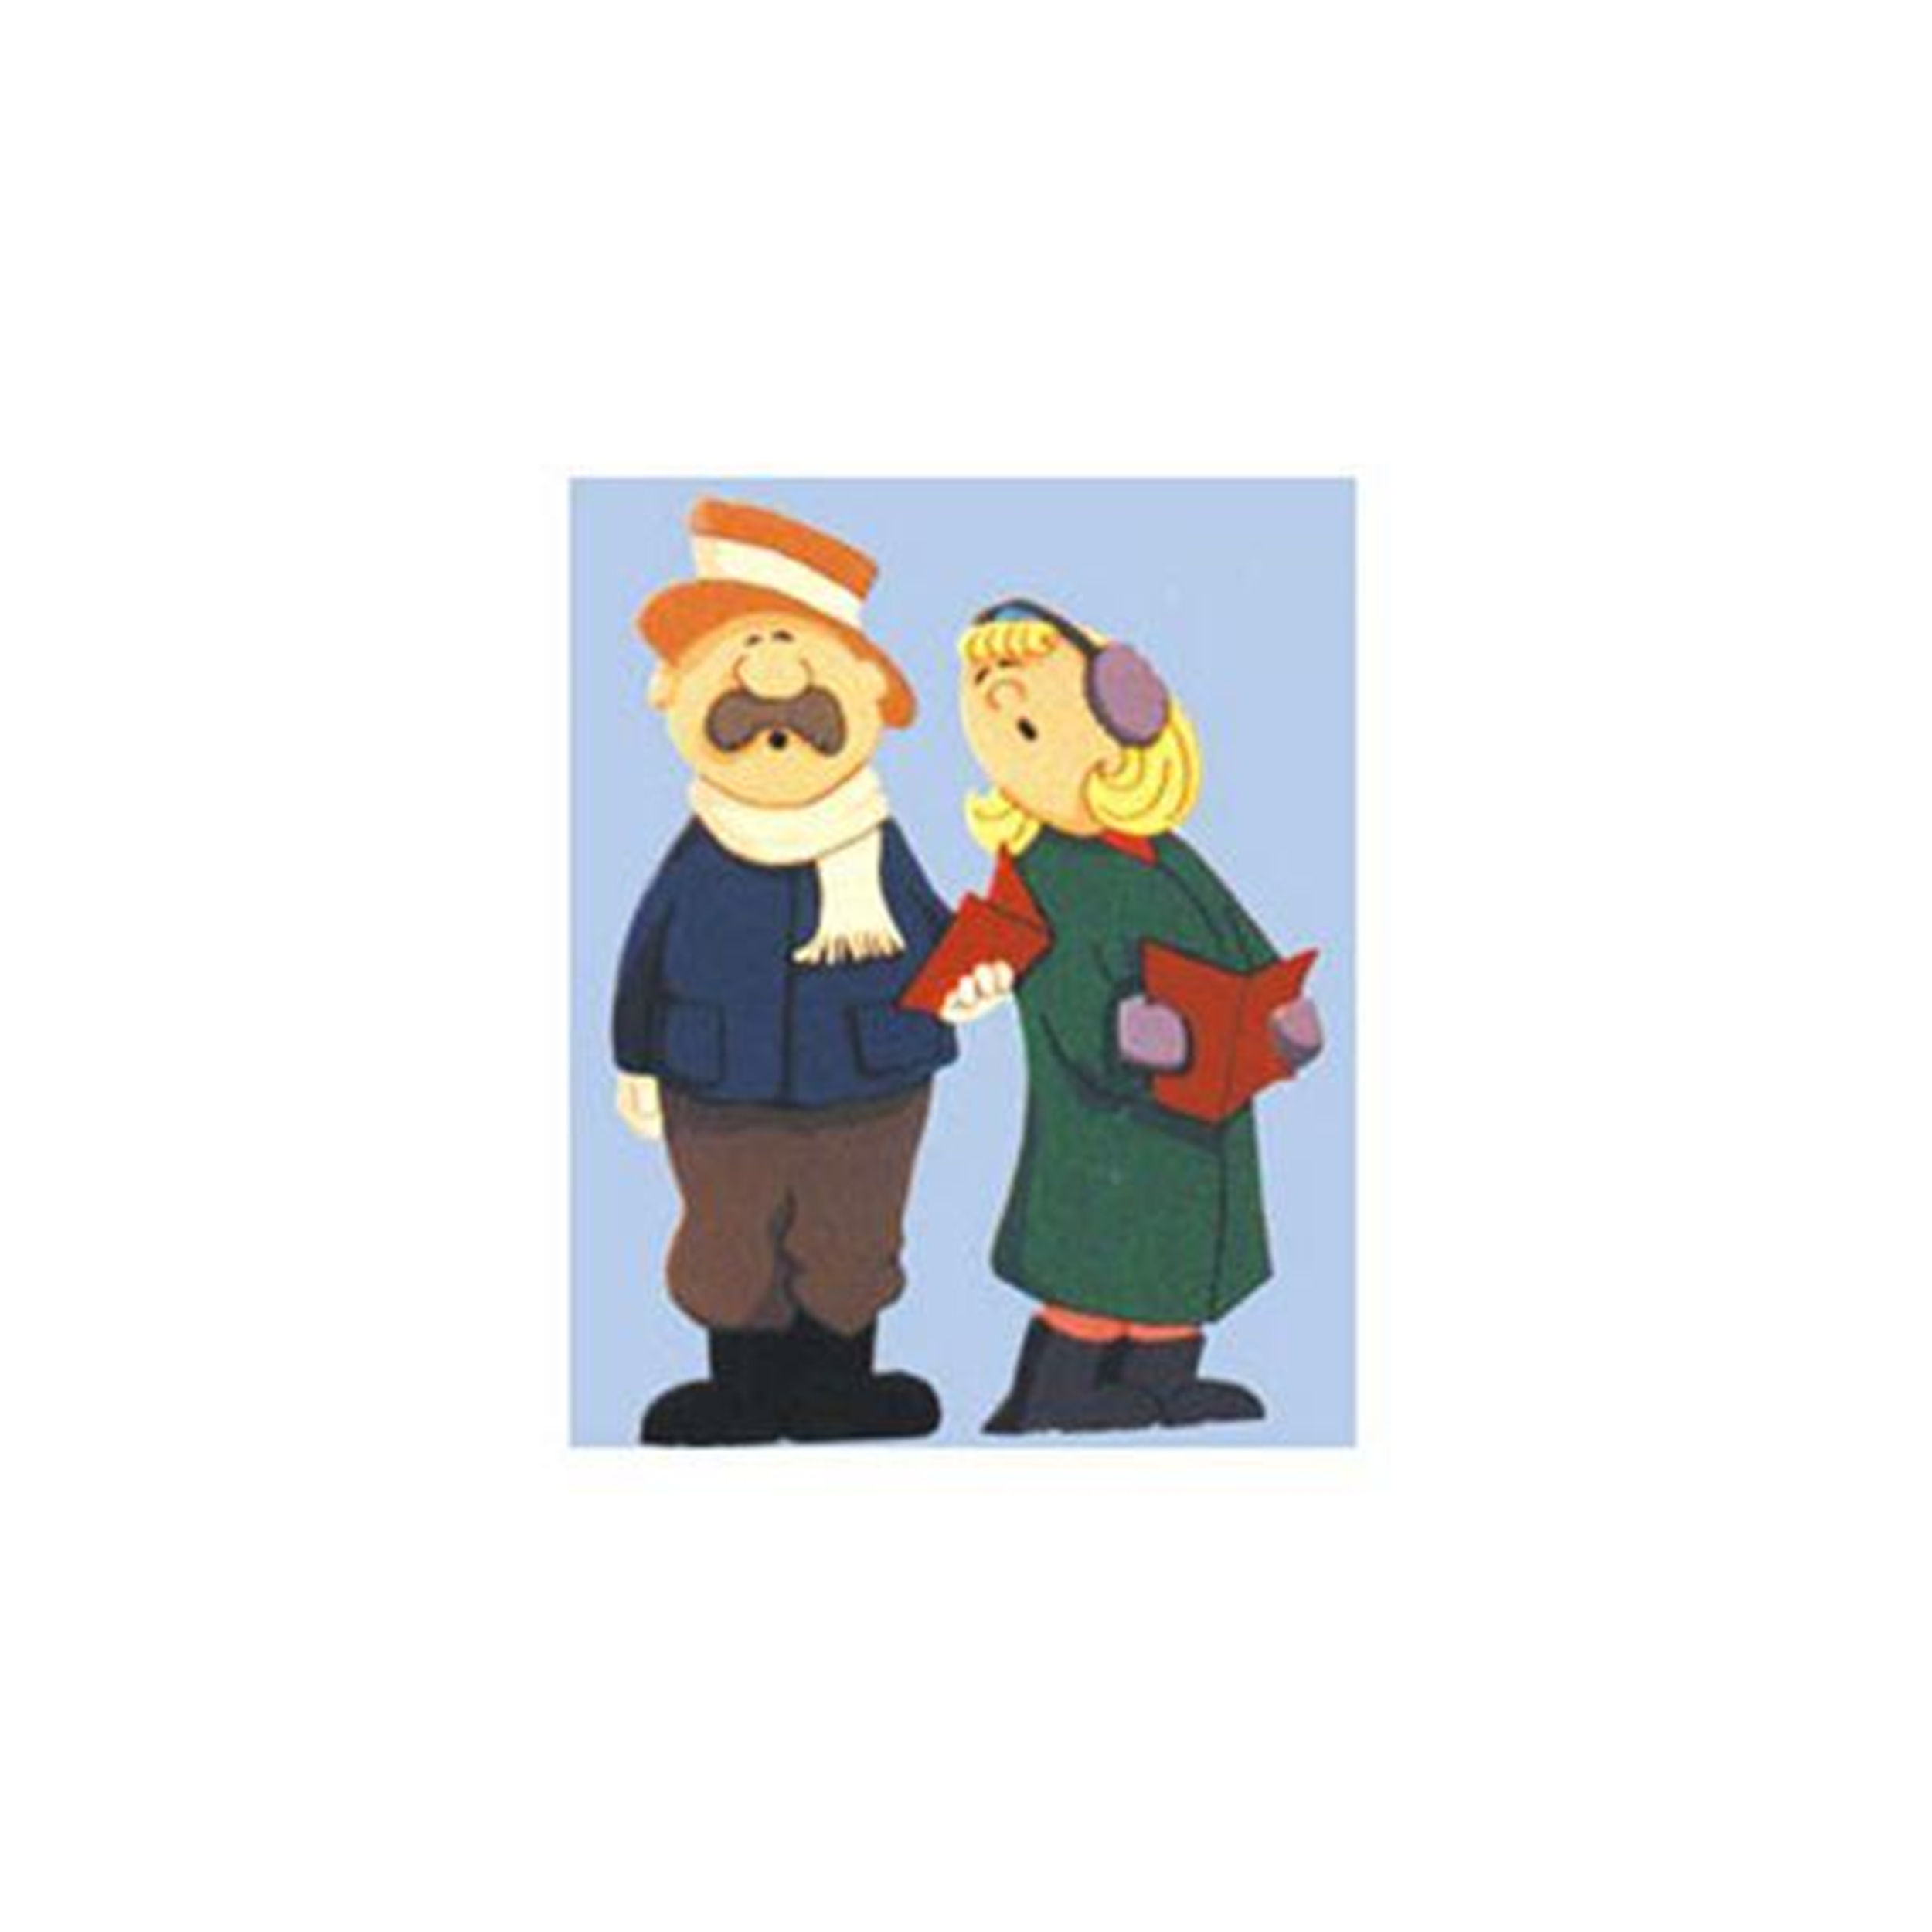 Woodworking Project Paper Plan To Build Man And Woman Carolers